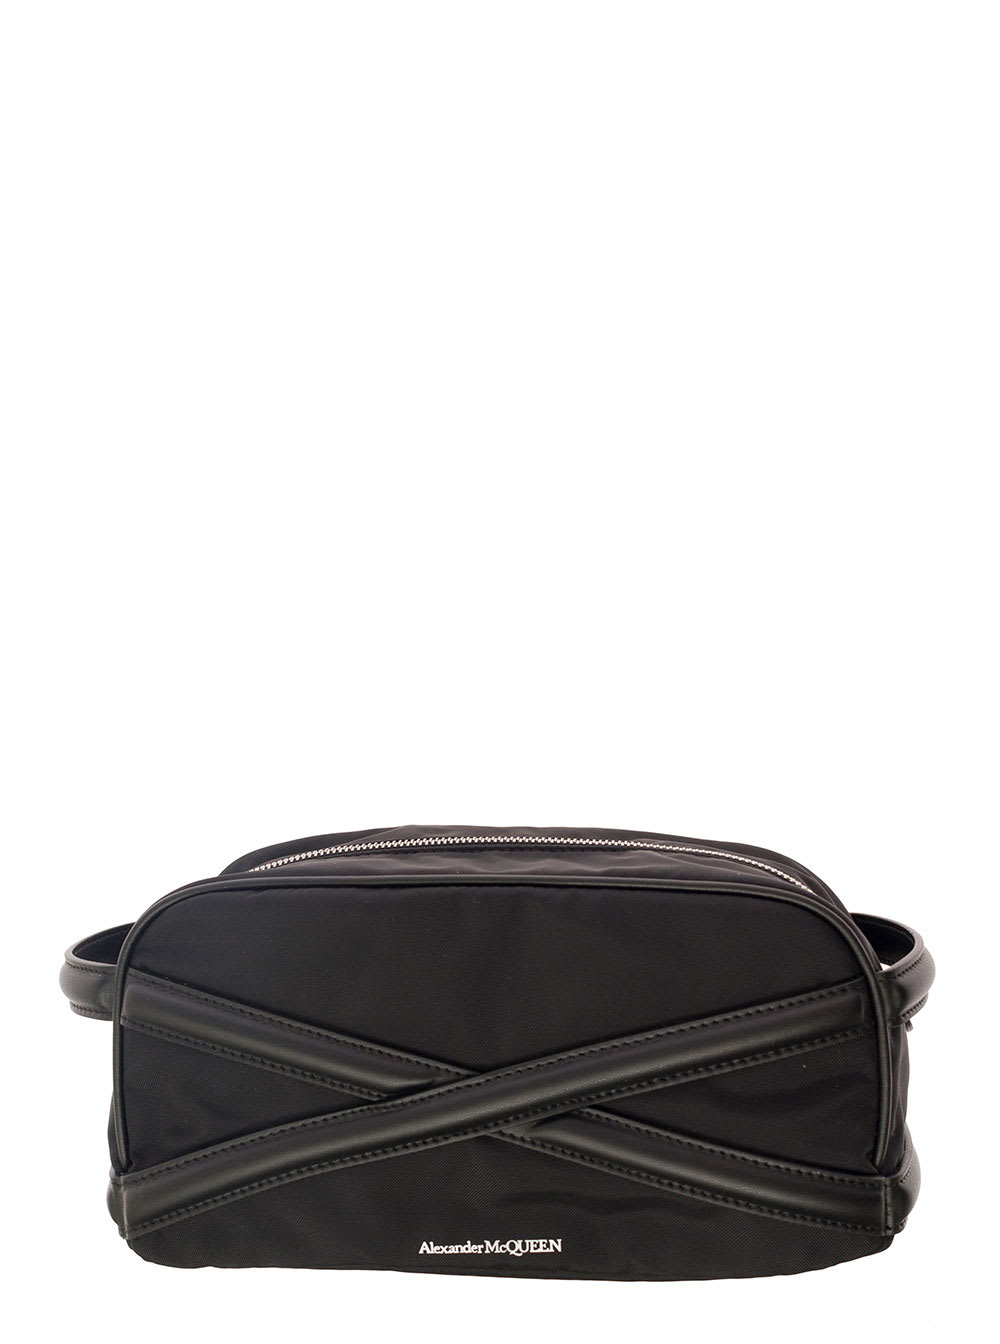 Alexander Mcqueen Black Beauty Case With Harness Detail In Fabric And Leather Man